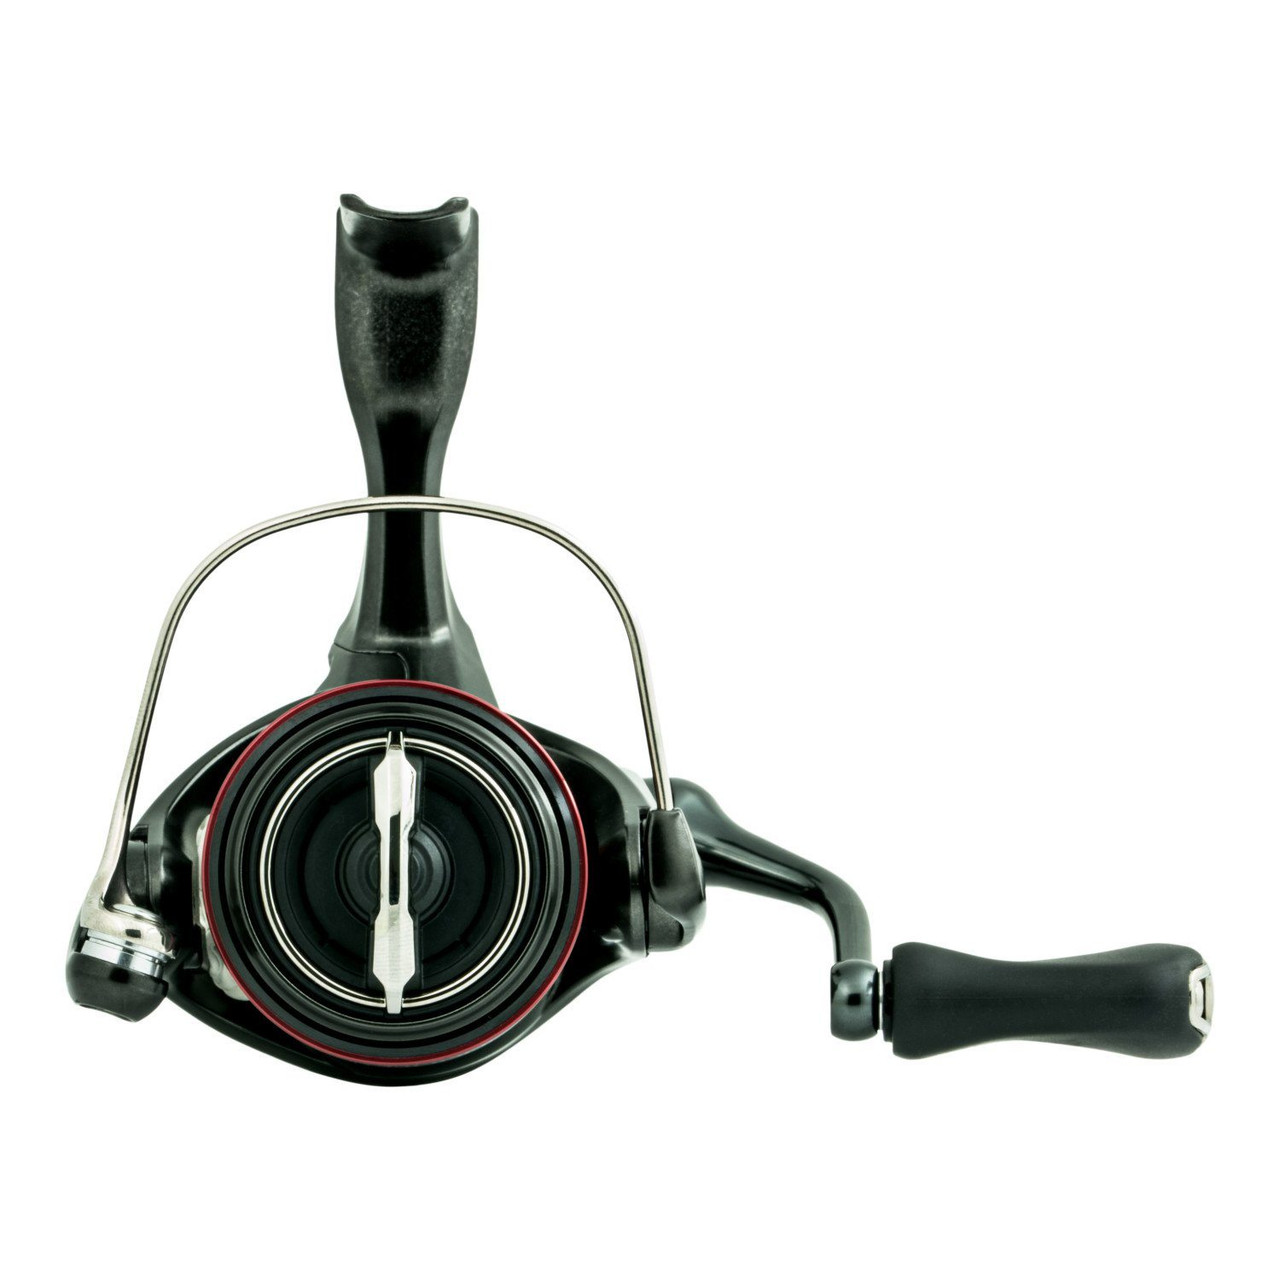 https://cdn11.bigcommerce.com/s-i6ykqoitnd/images/stencil/1280x1280/products/10159/59108/shimano-vanford-f-spinning-reel-new-spinning-freshwater-shimano-465527__14320.1639601247.jpg?c=1&imbypass=on